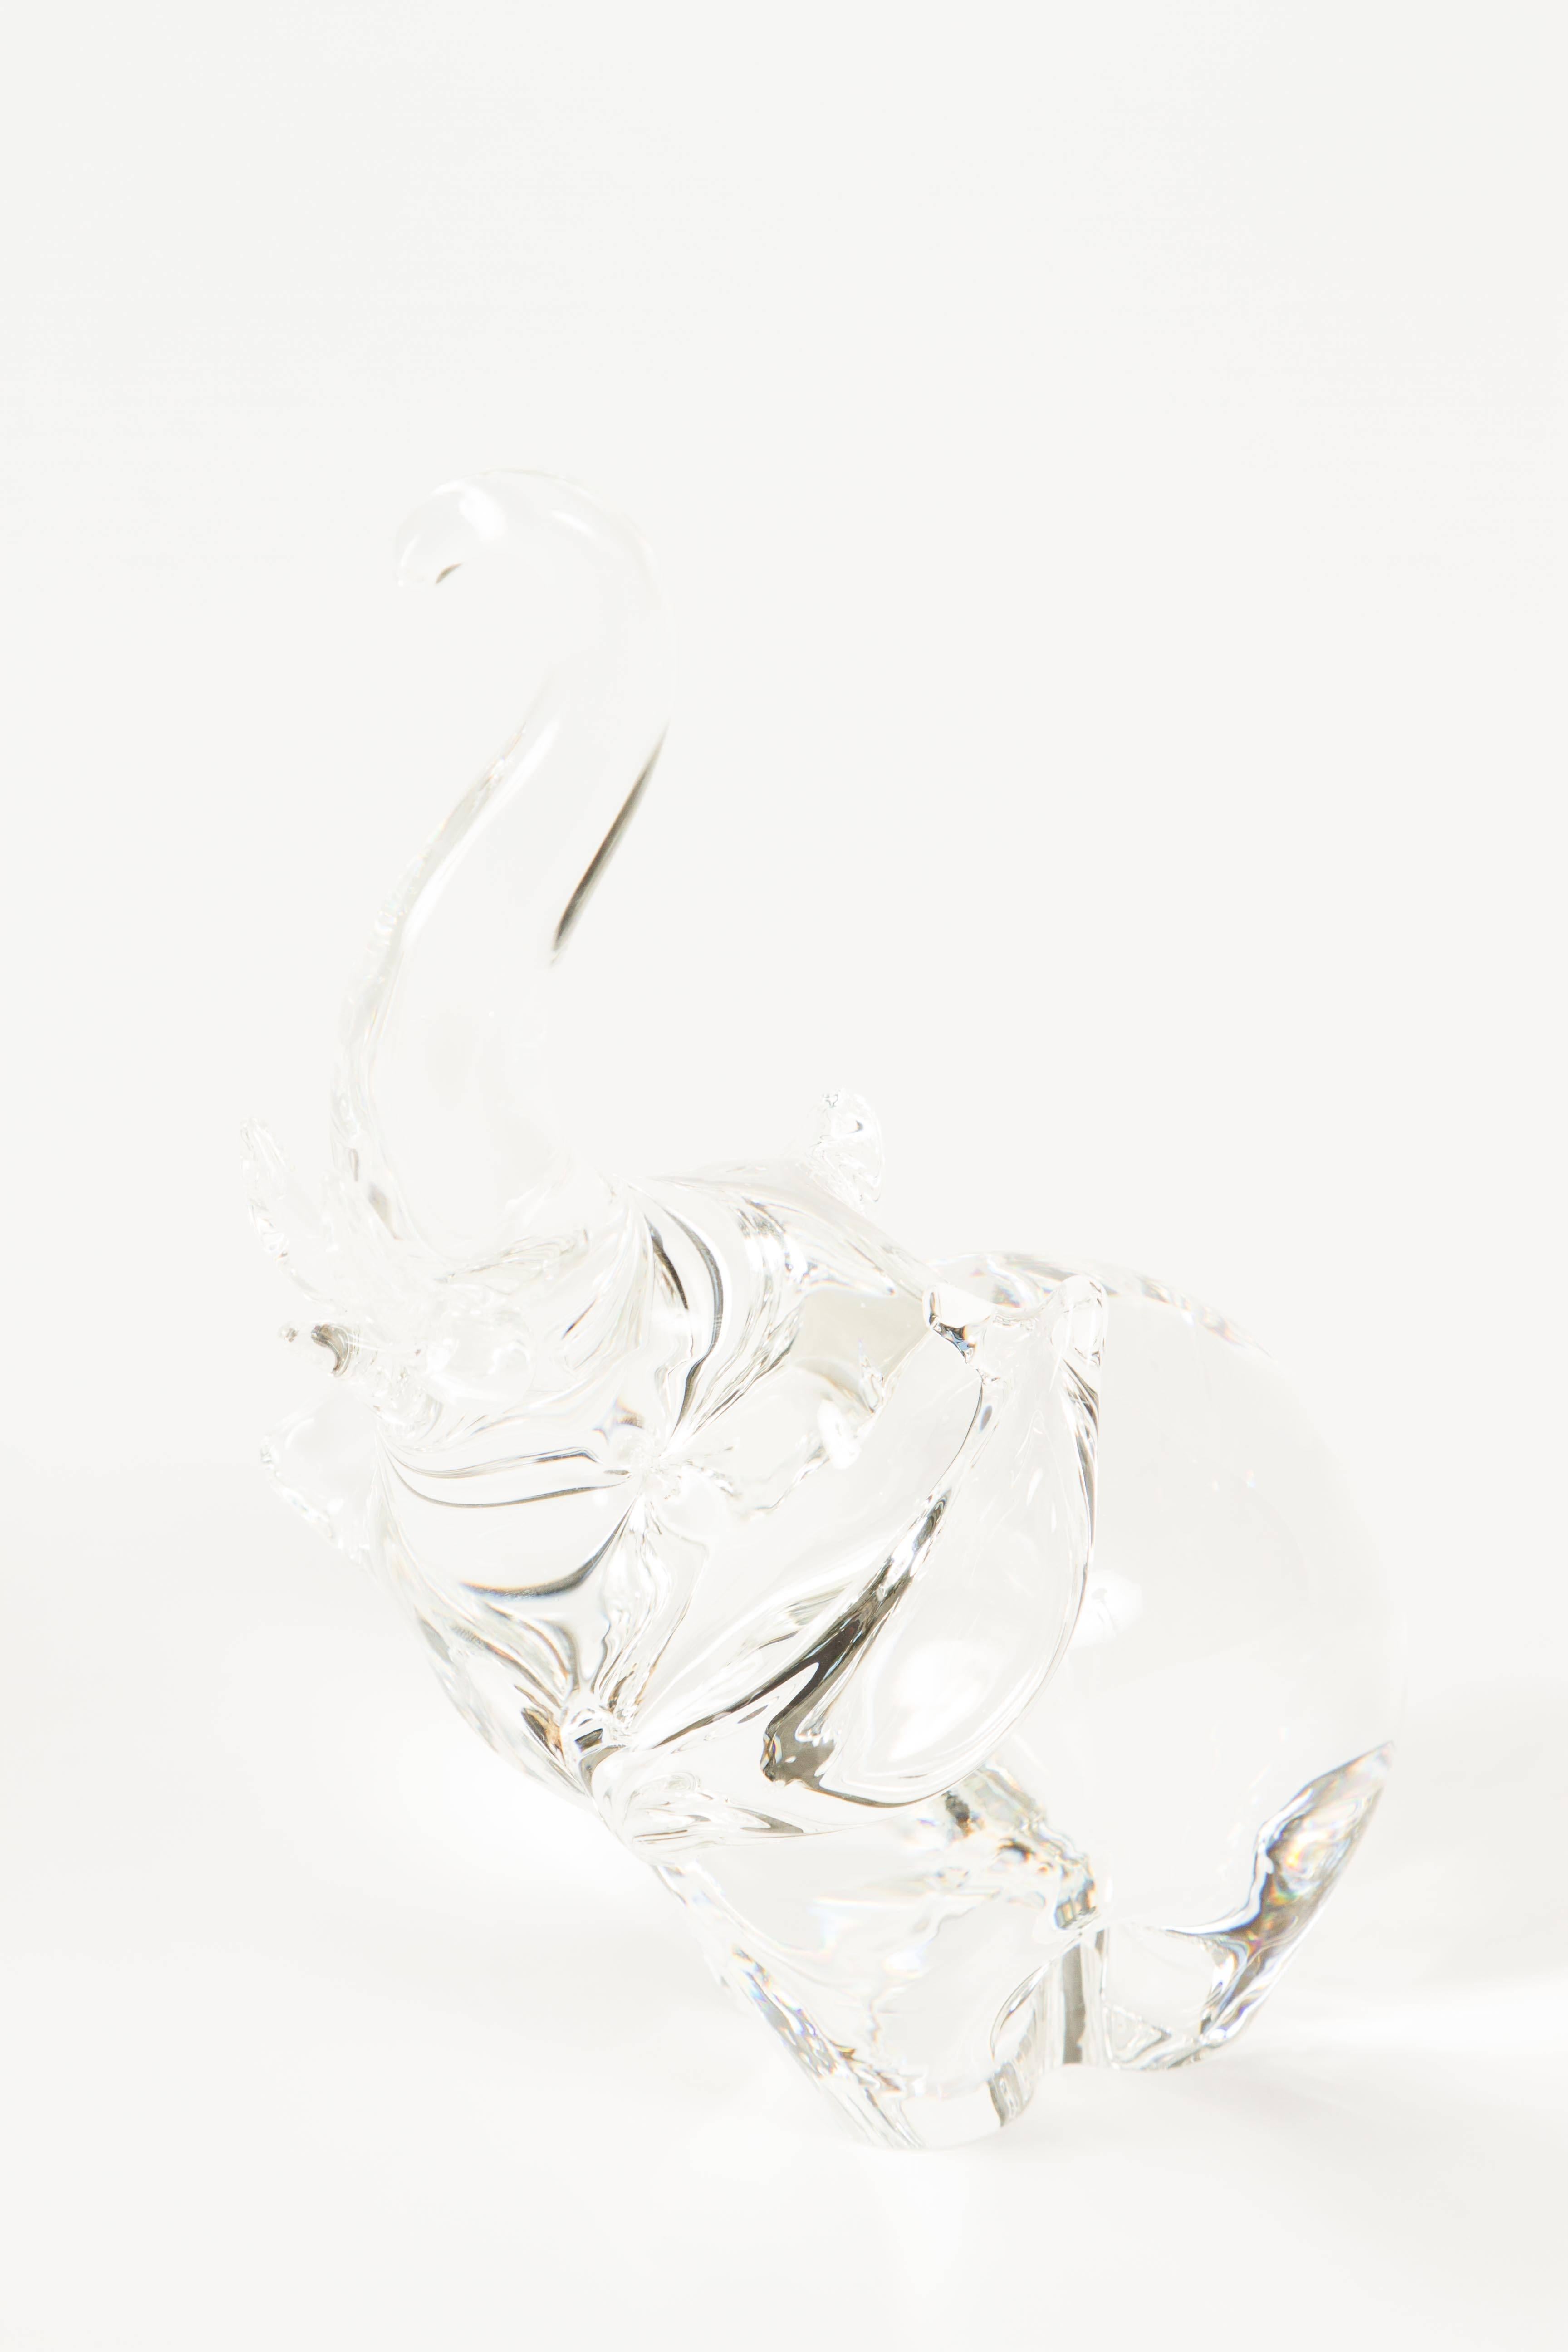 Mid-Century Modern Trumpeting Elephant by James Houston for Steuben Glass